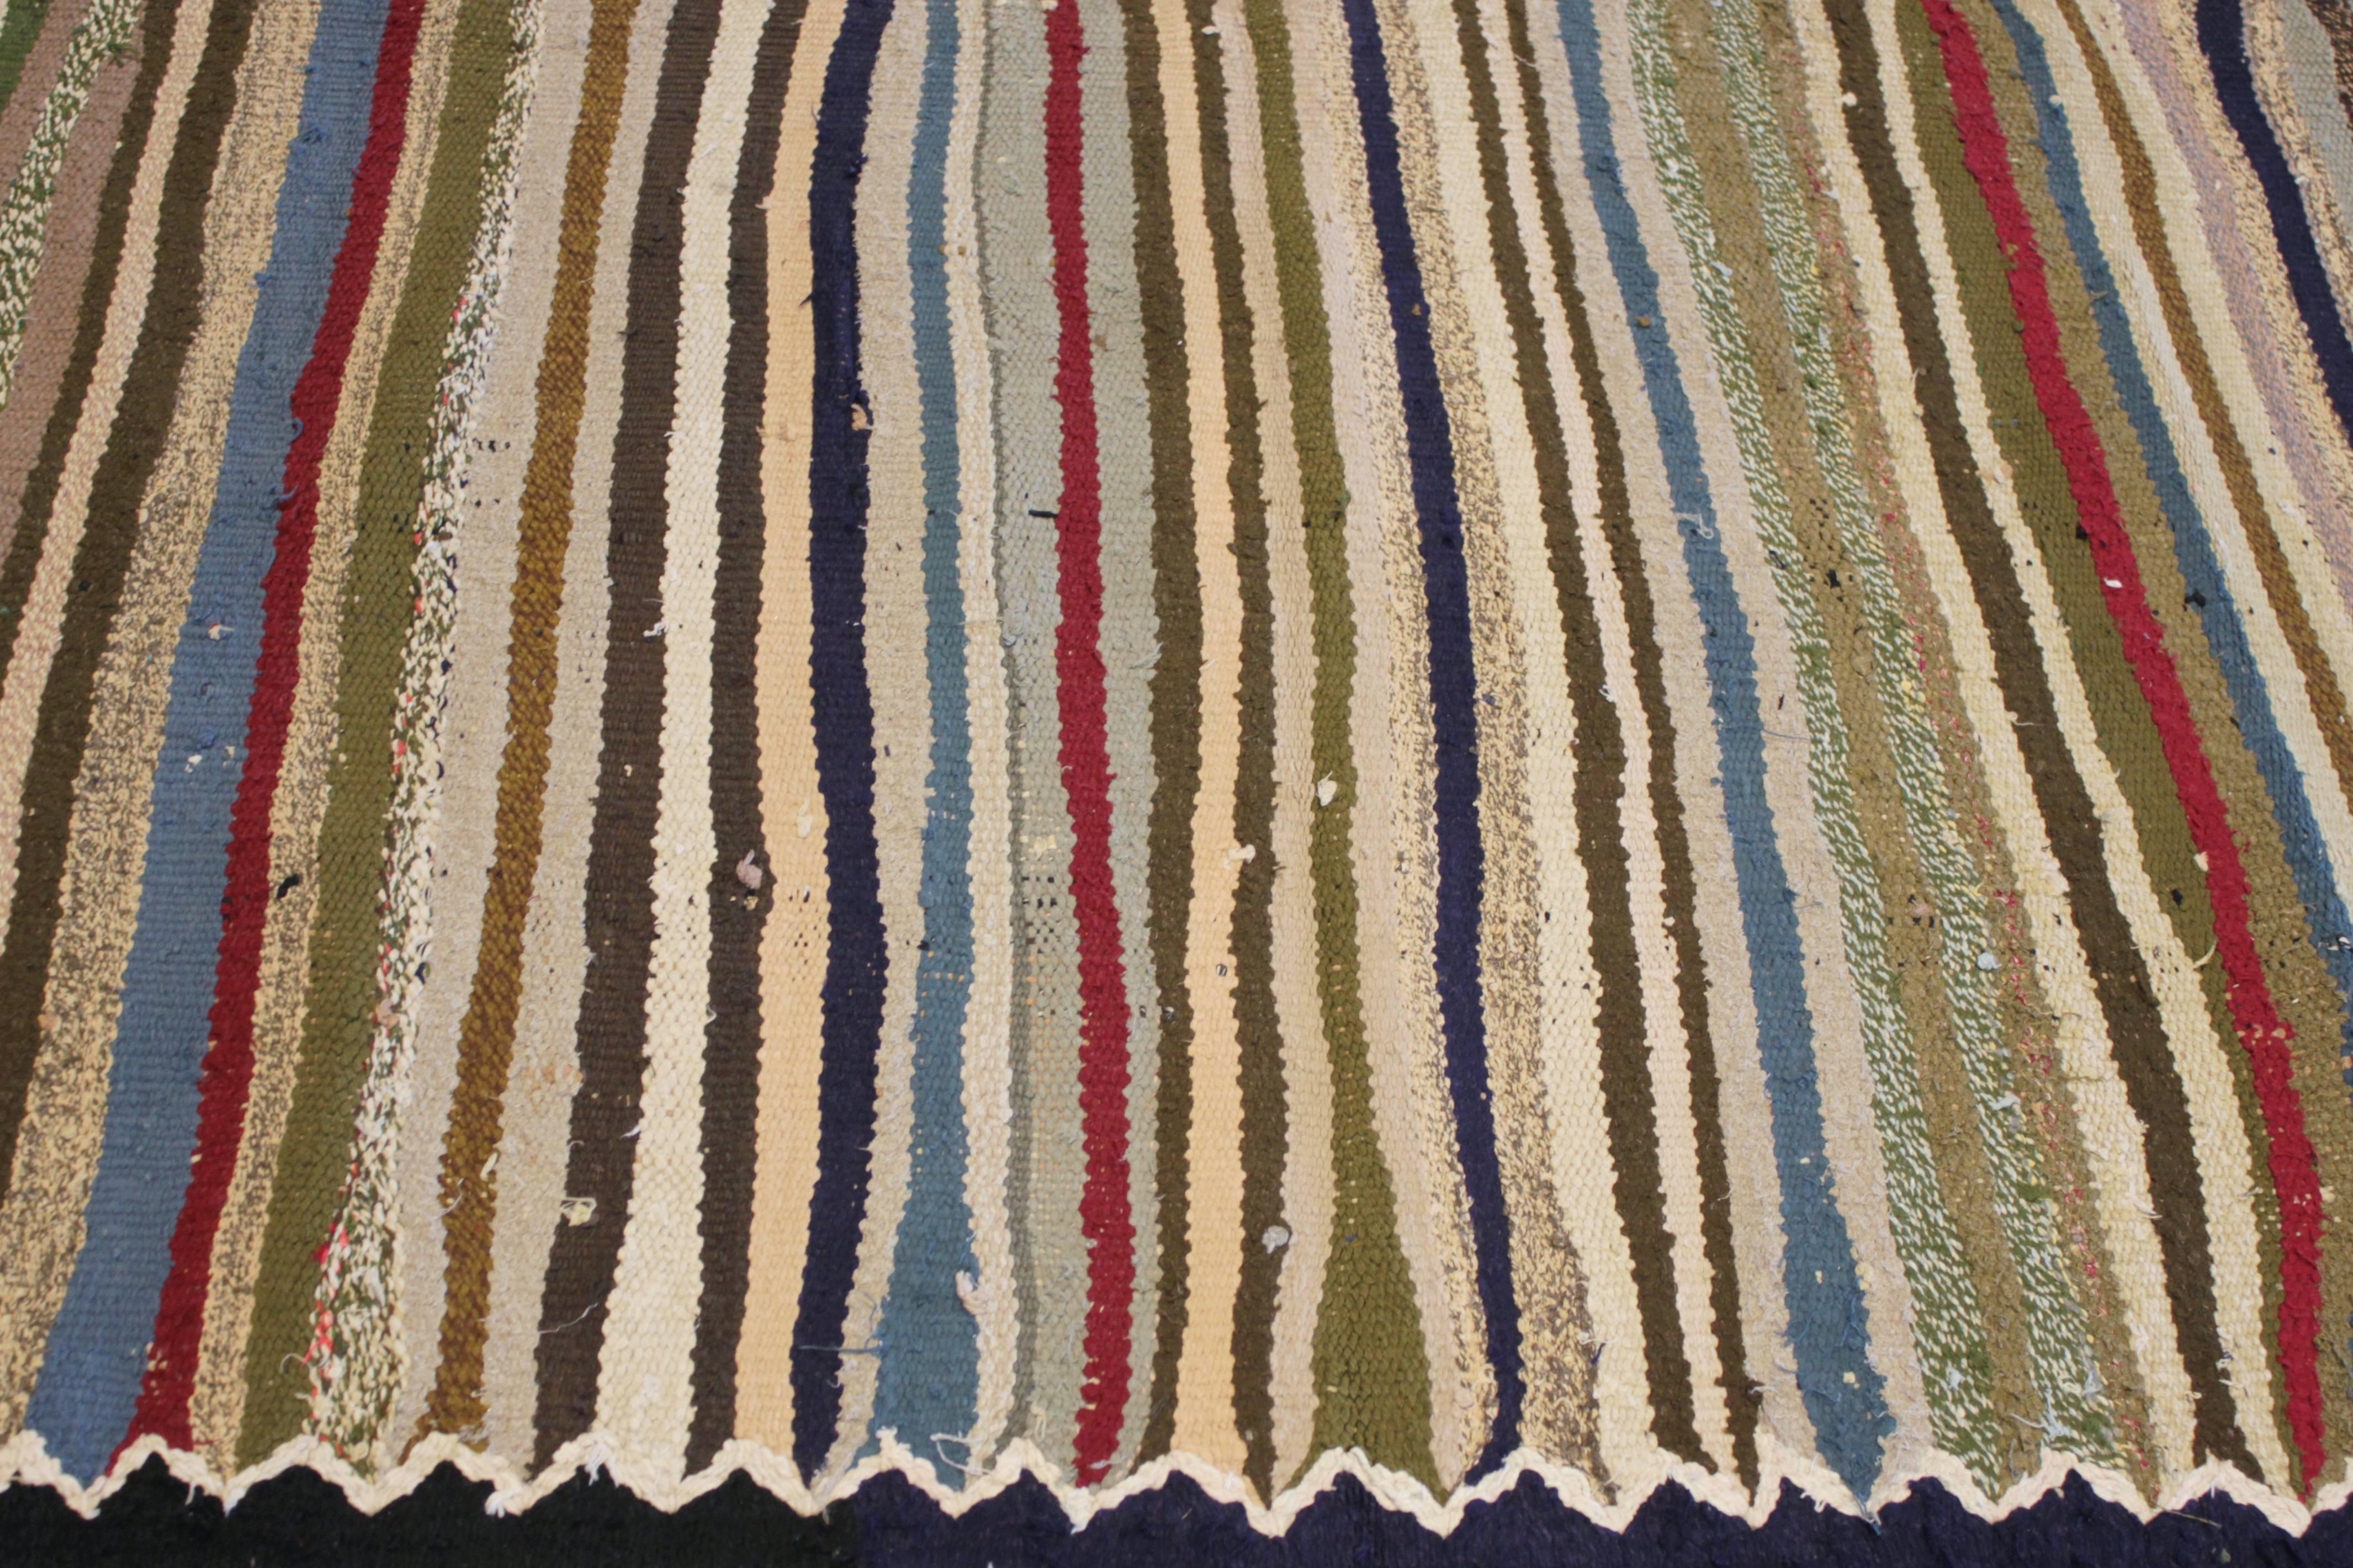 Beautifully Designed Vintage Persian Kilim Rug In Excellent Condition For Sale In Norwalk, CT